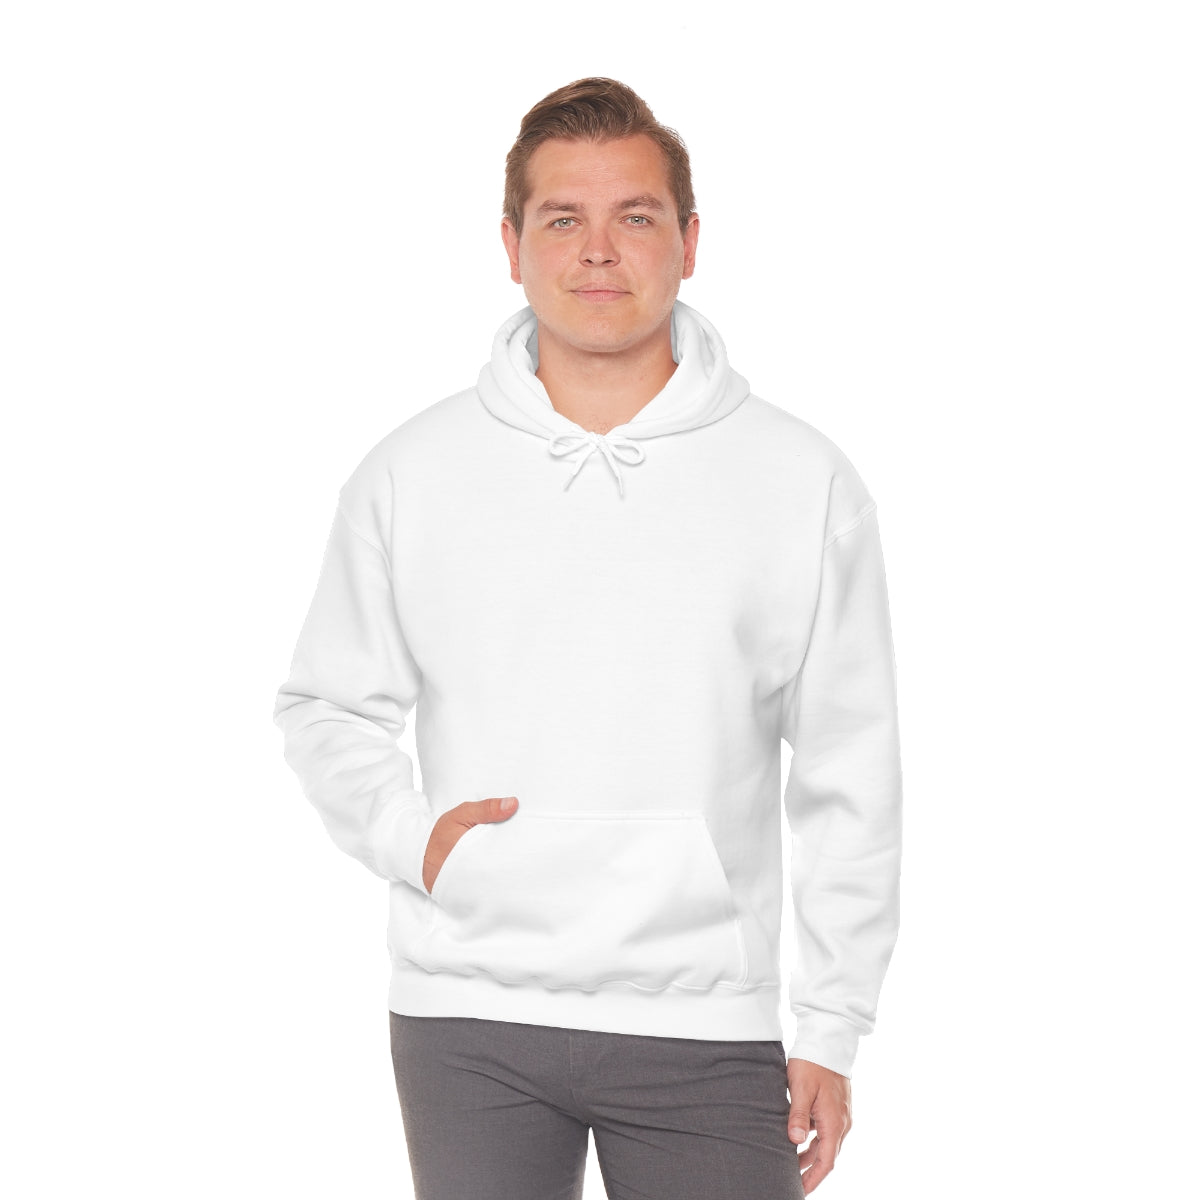 If You Can See This She Fell Off Hoodie Unisex Heavy Blend™ Hooded Sweatshirt